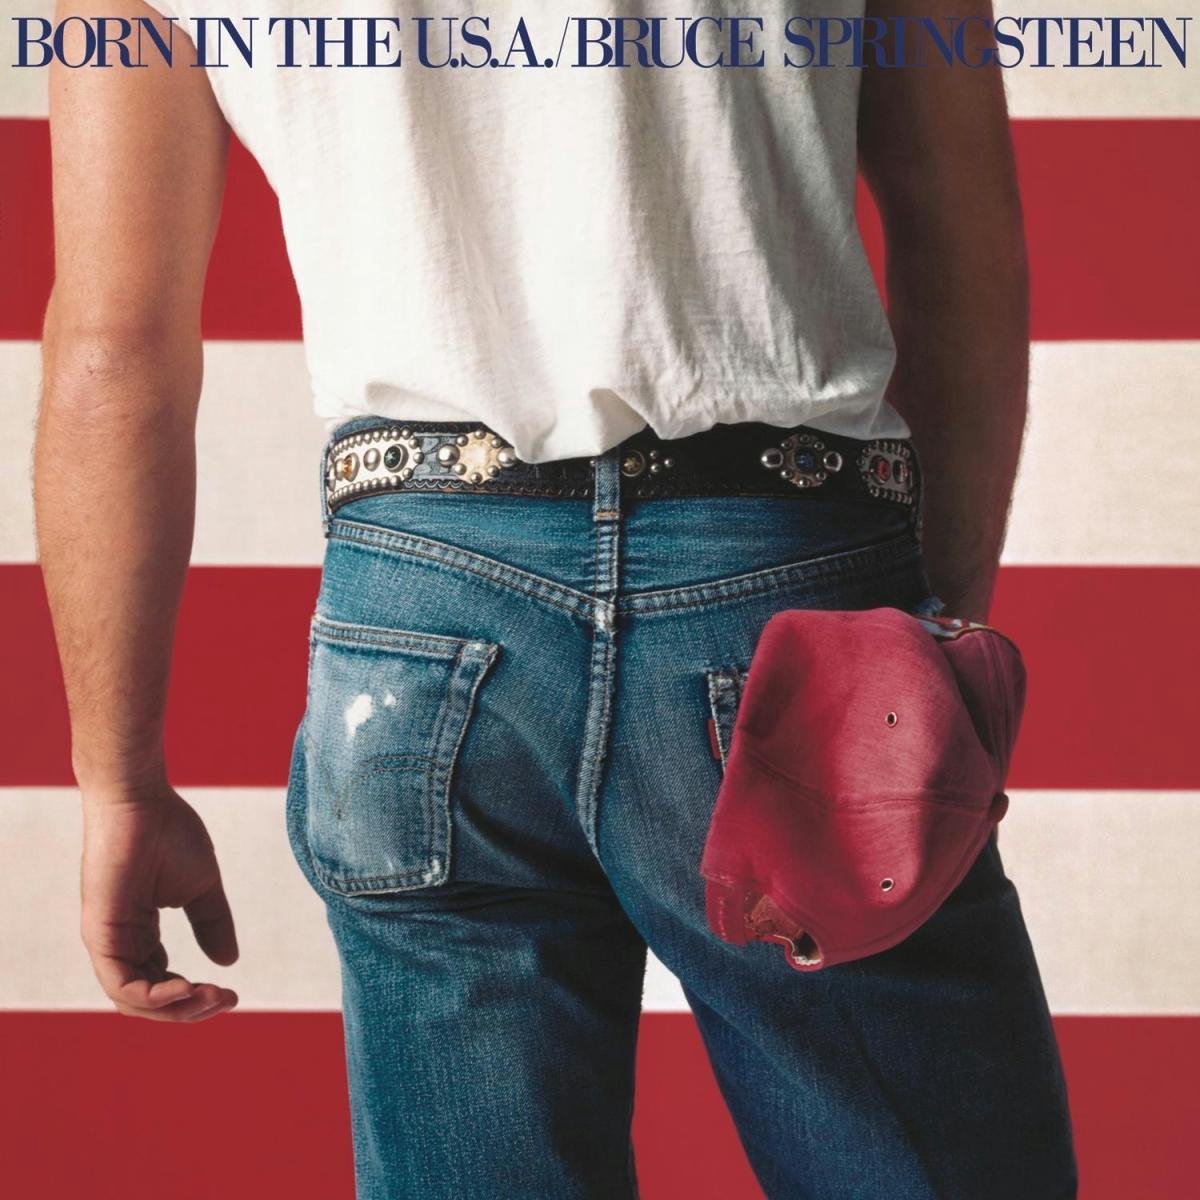 Born In The U.S.A. (LP) - Bruce Springsteen